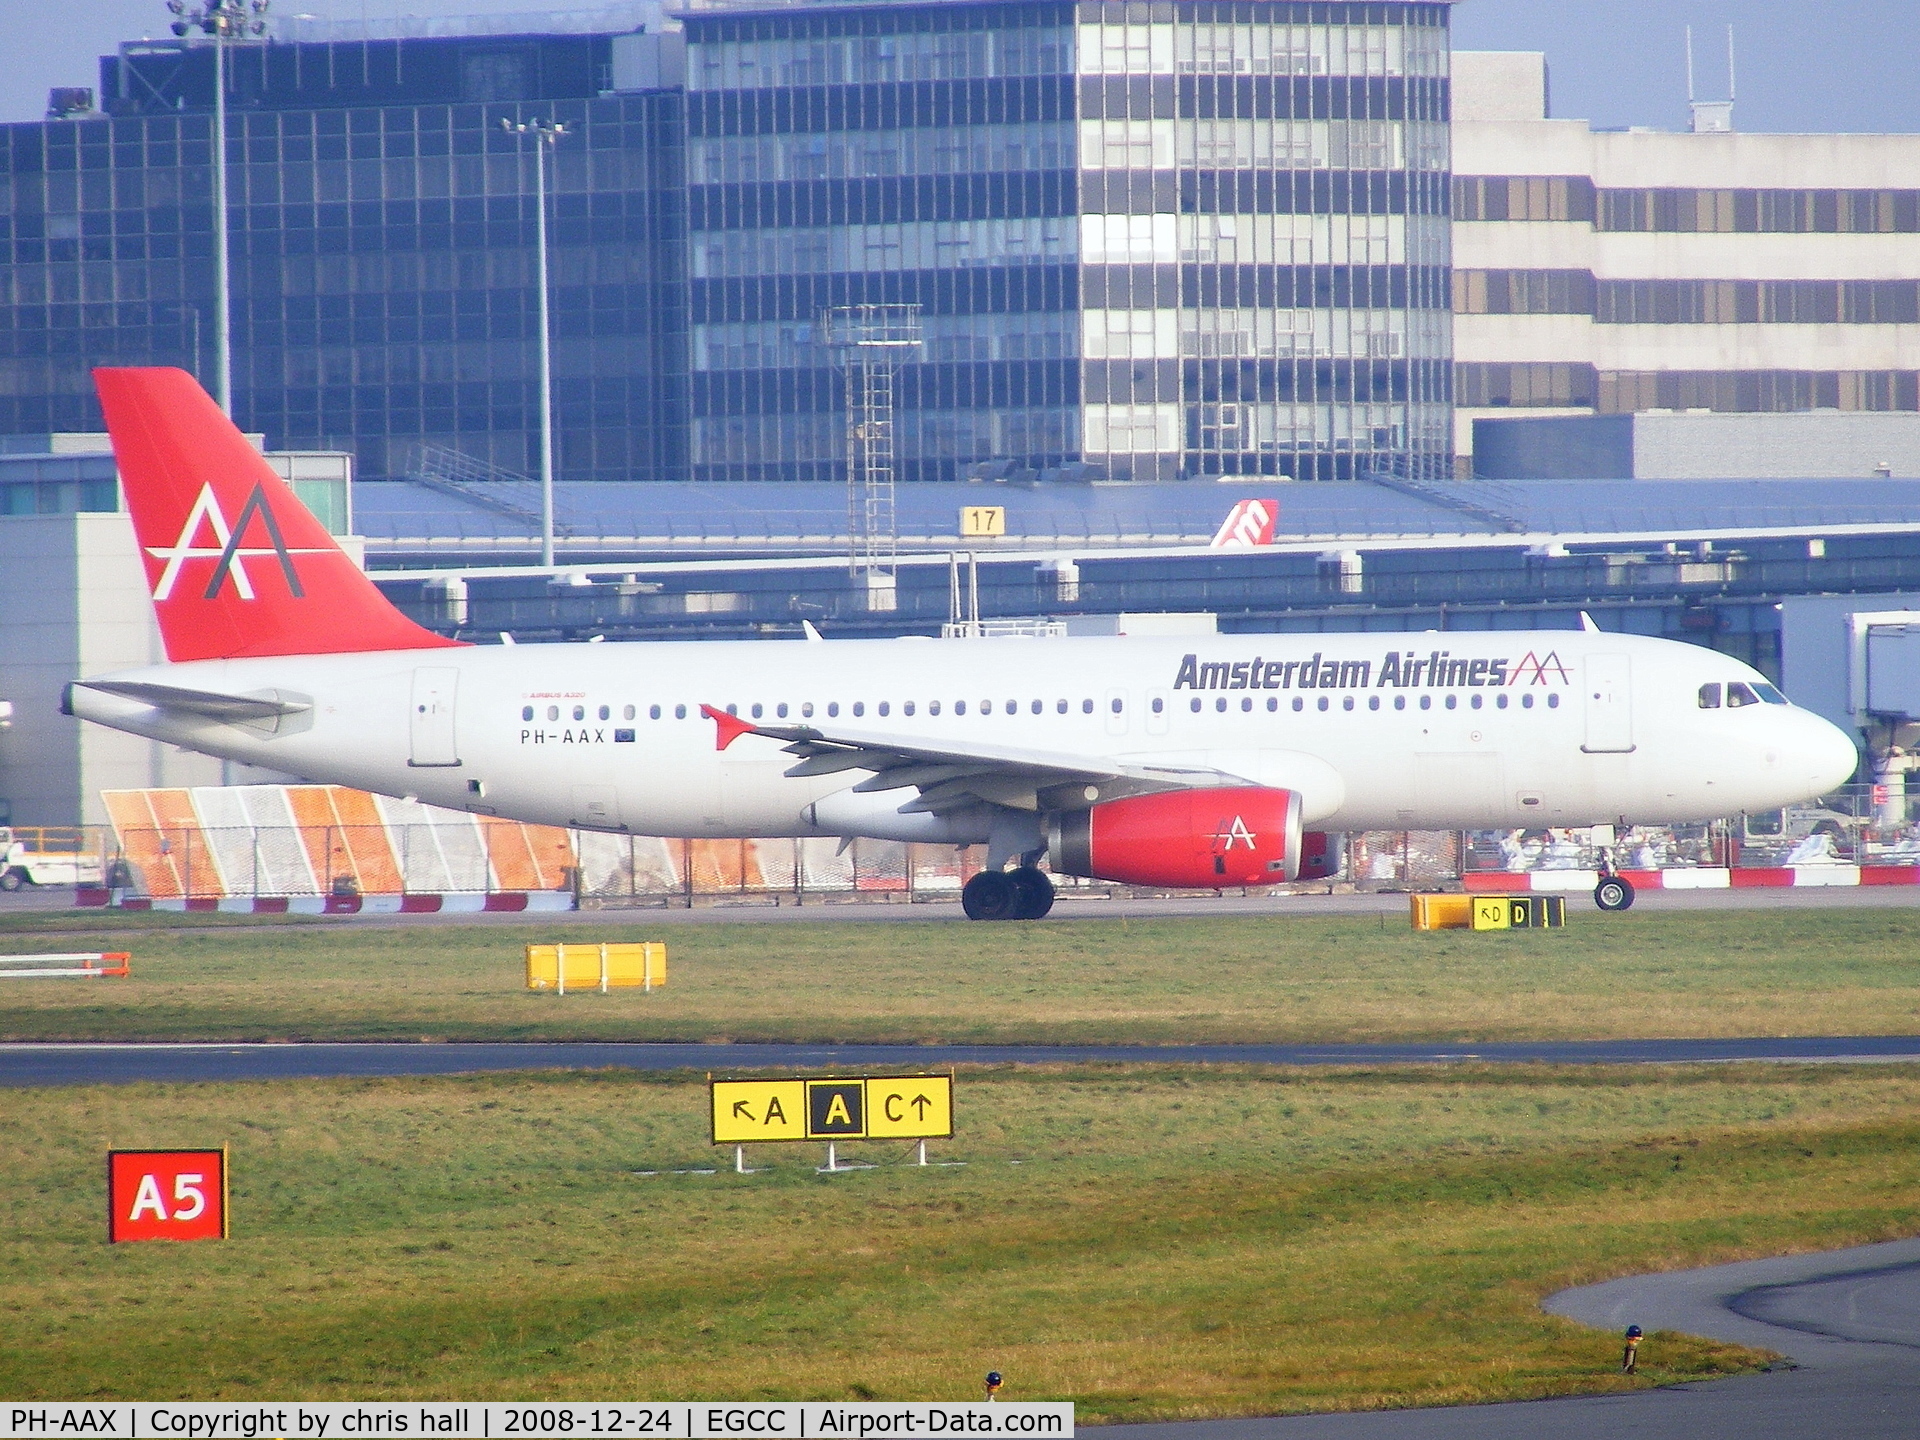 PH-AAX, 1993 Airbus A320-231 C/N 430, Amsterdam Airlines